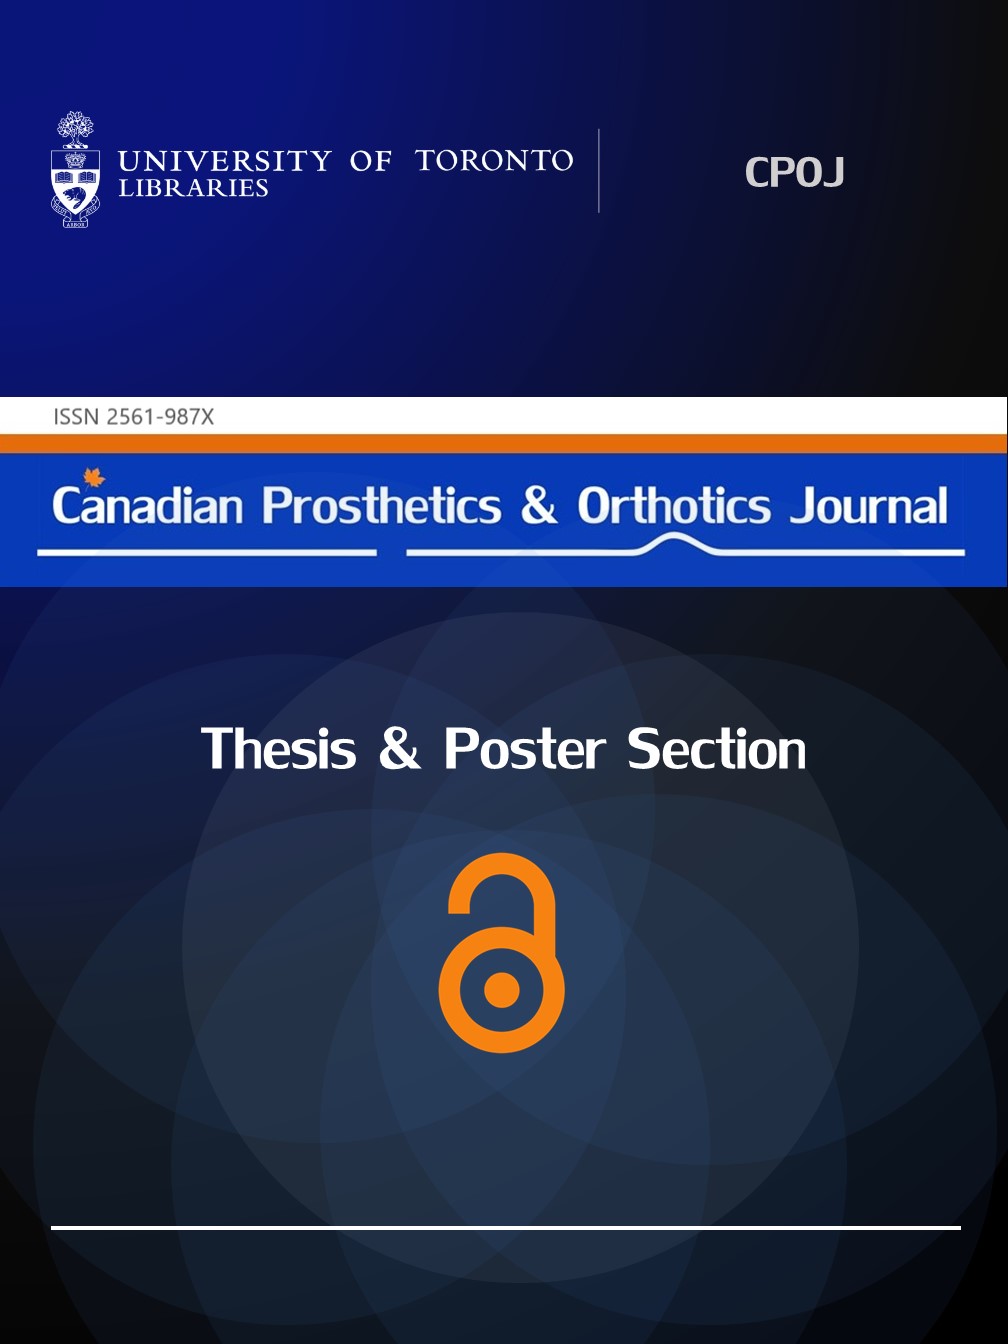 Canadian Prosthetics & Orthotics Journal (Thesis & Poster Section)